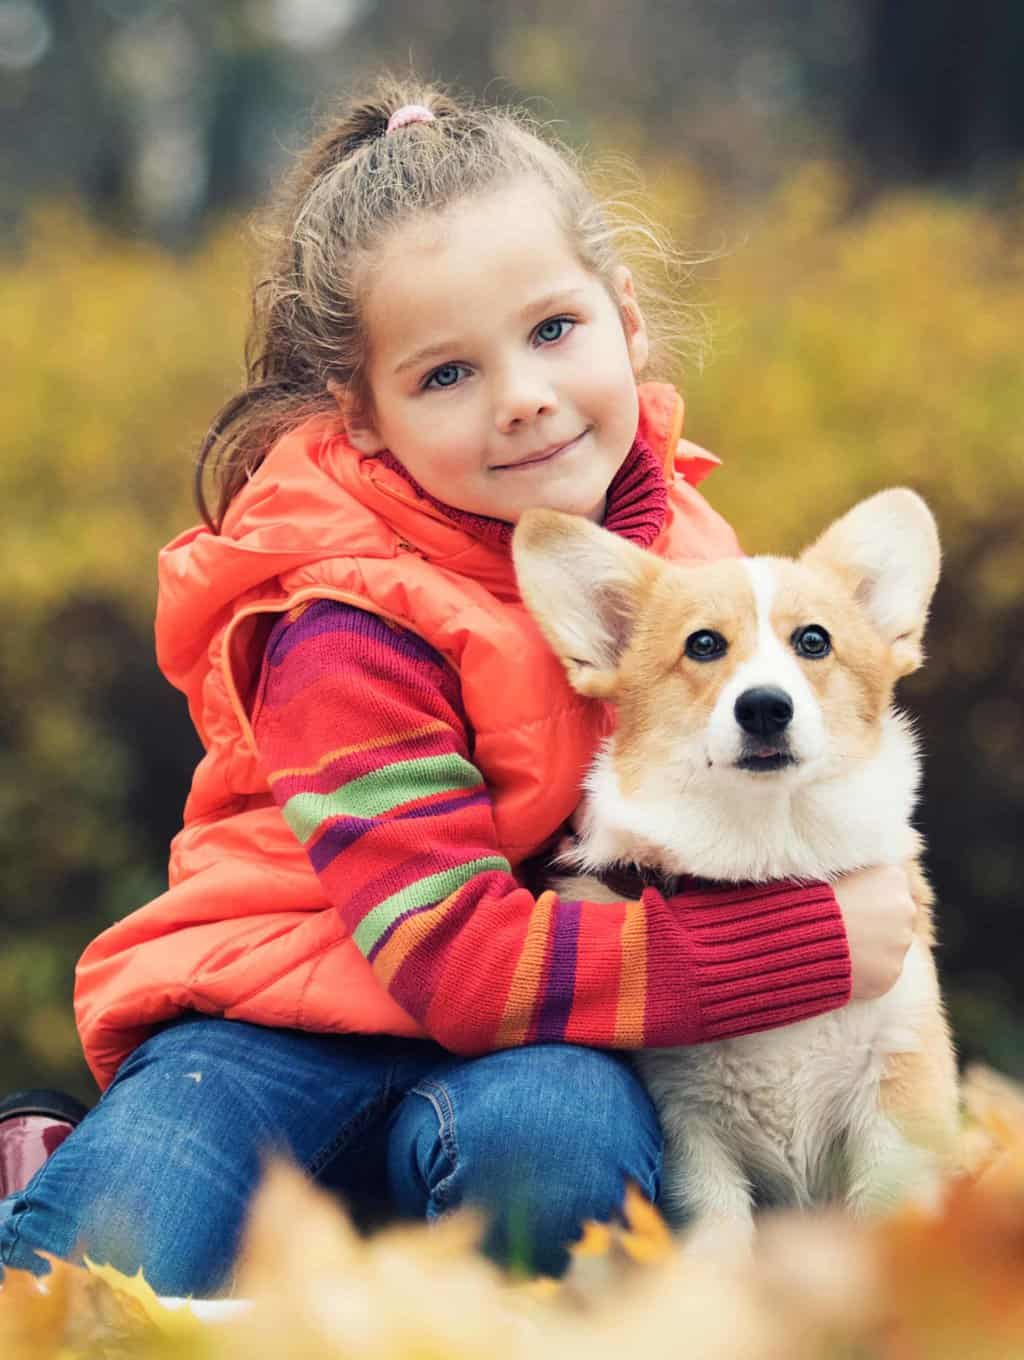 Young girl cuddles with corgi puppy. Prepare your kids by teaching them what to expect and what changes must happen before you bring the new puppy home.